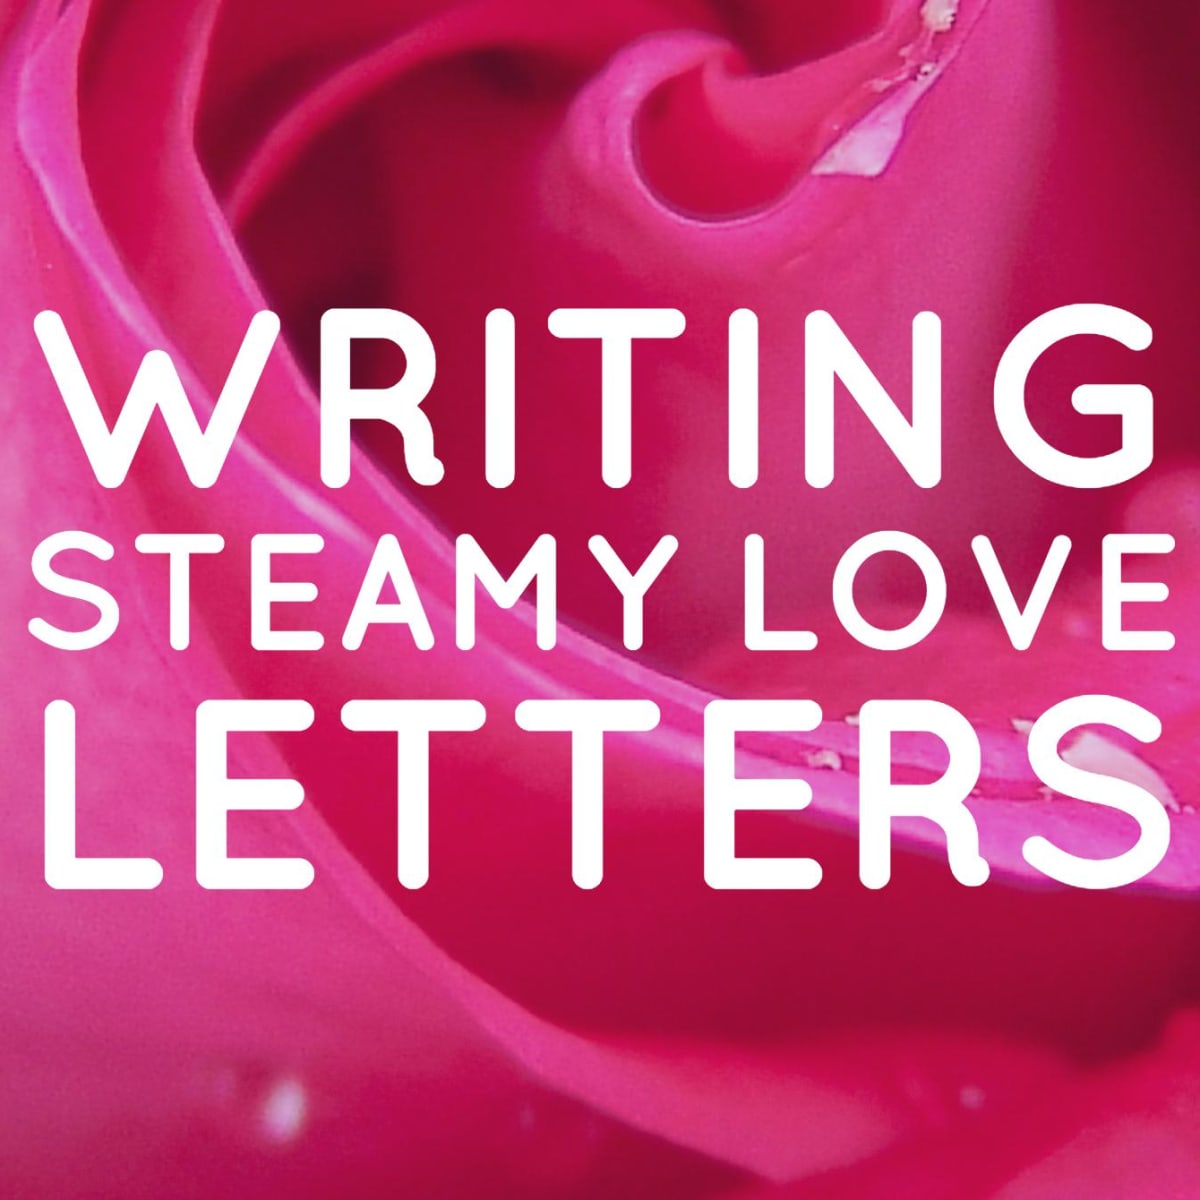 Passionate love making letters